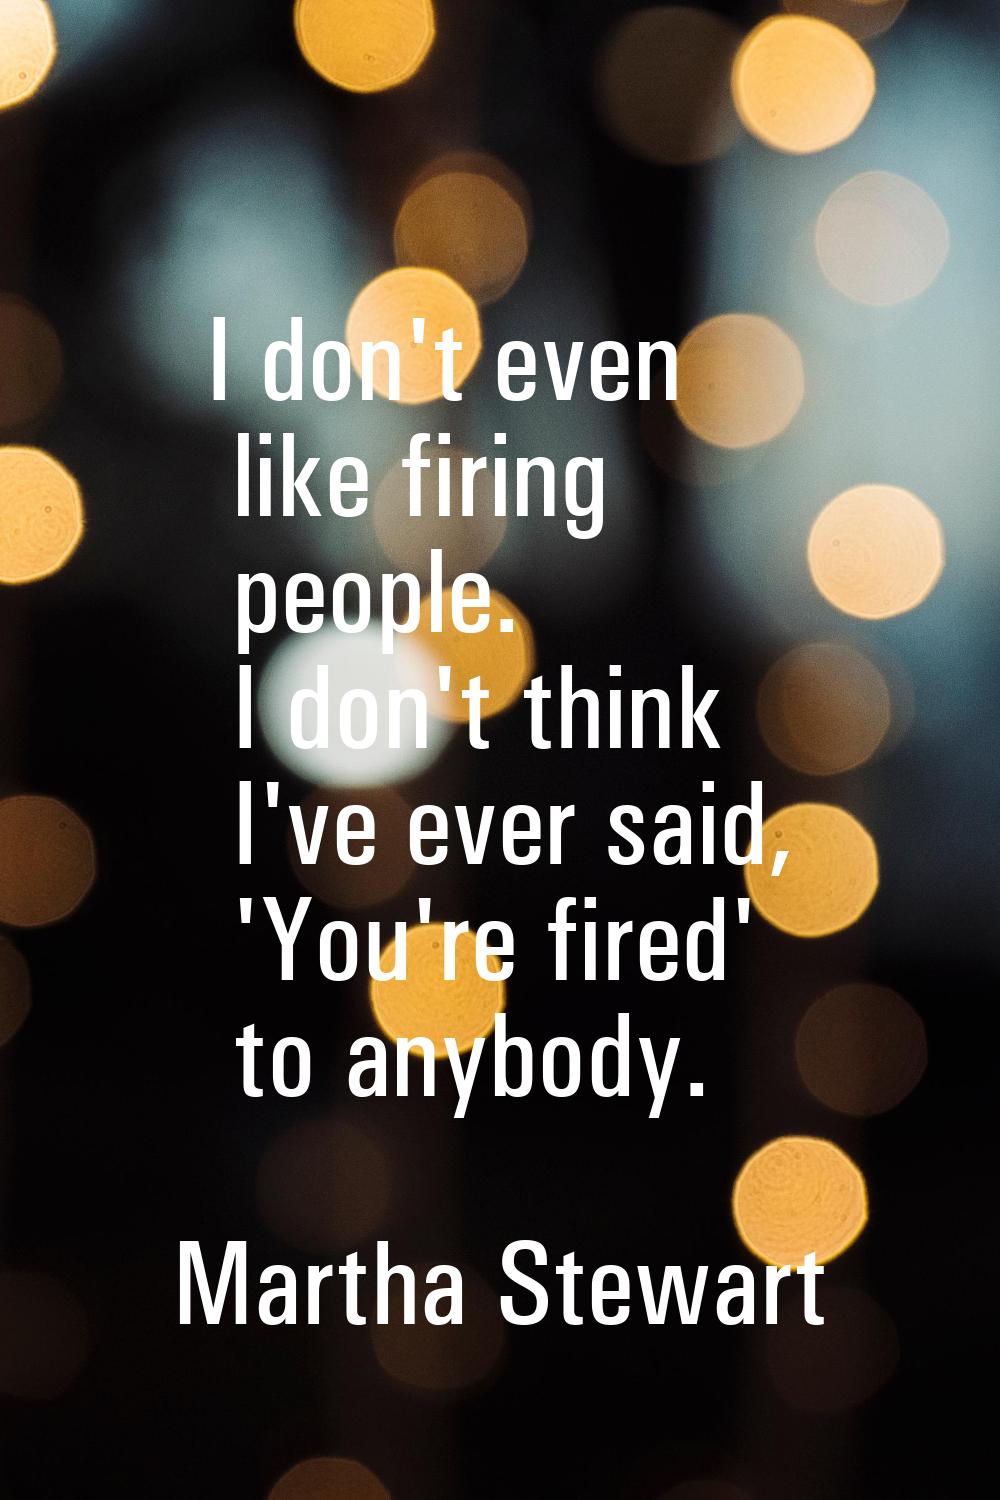 I don't even like firing people. I don't think I've ever said, 'You're fired' to anybody.